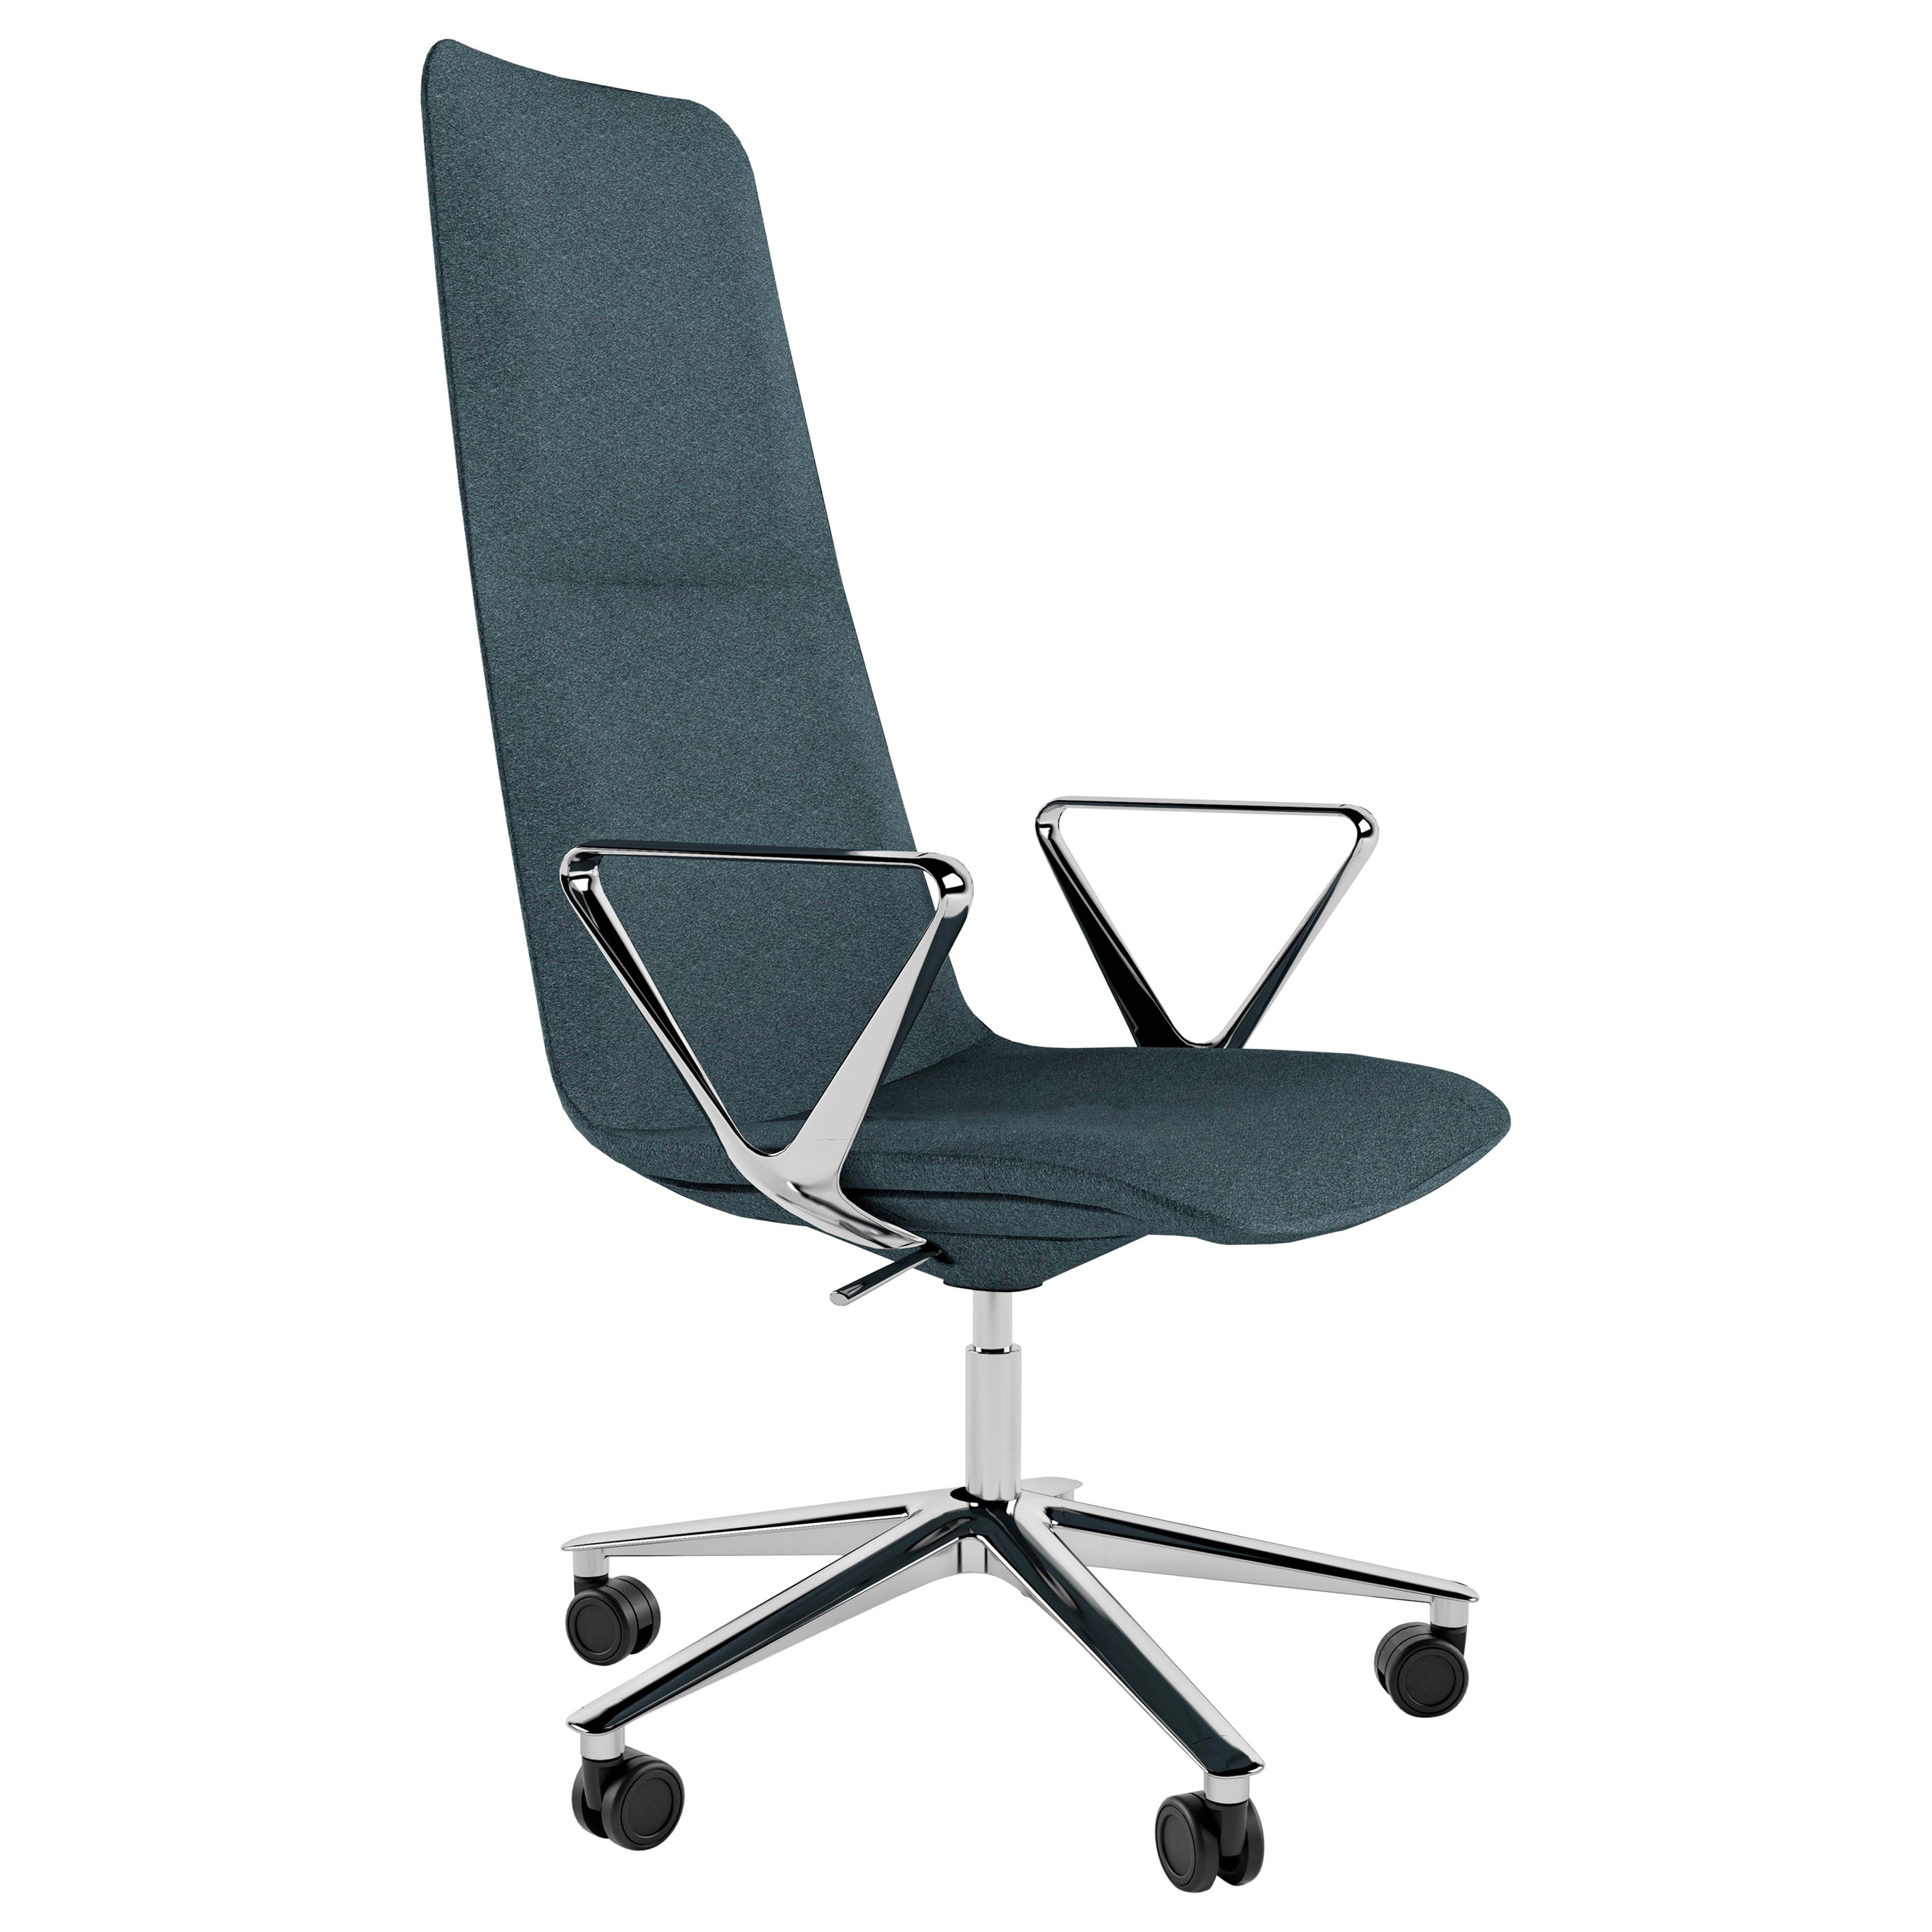 Alias 826 Slim Conference High 5 Y Shaped Chair with Grey Seat & Chromed Frame For Sale